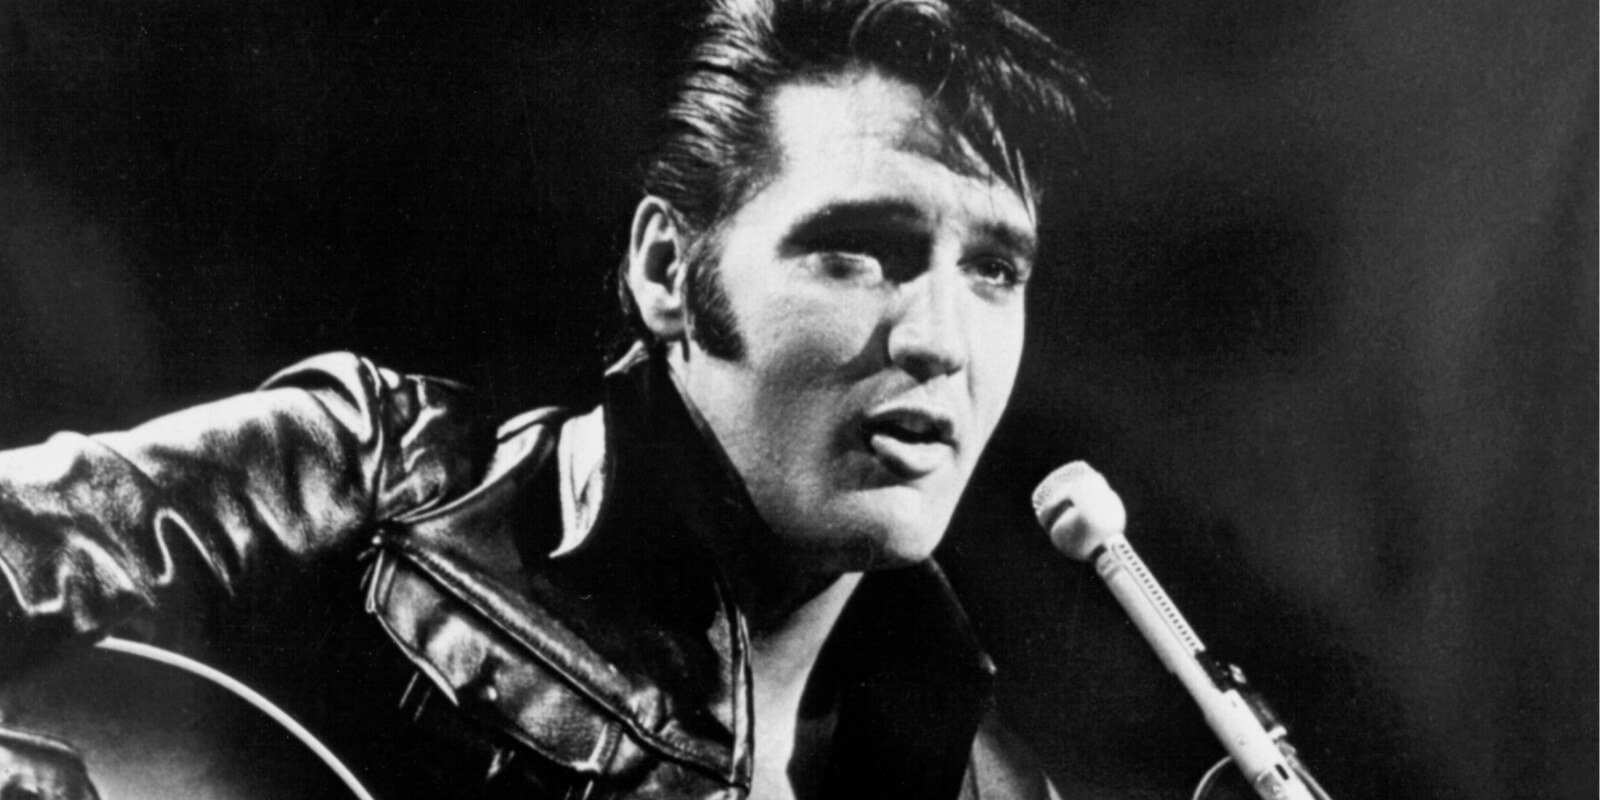 Elvis Presley performing during the 1968 comeback special on NBC.